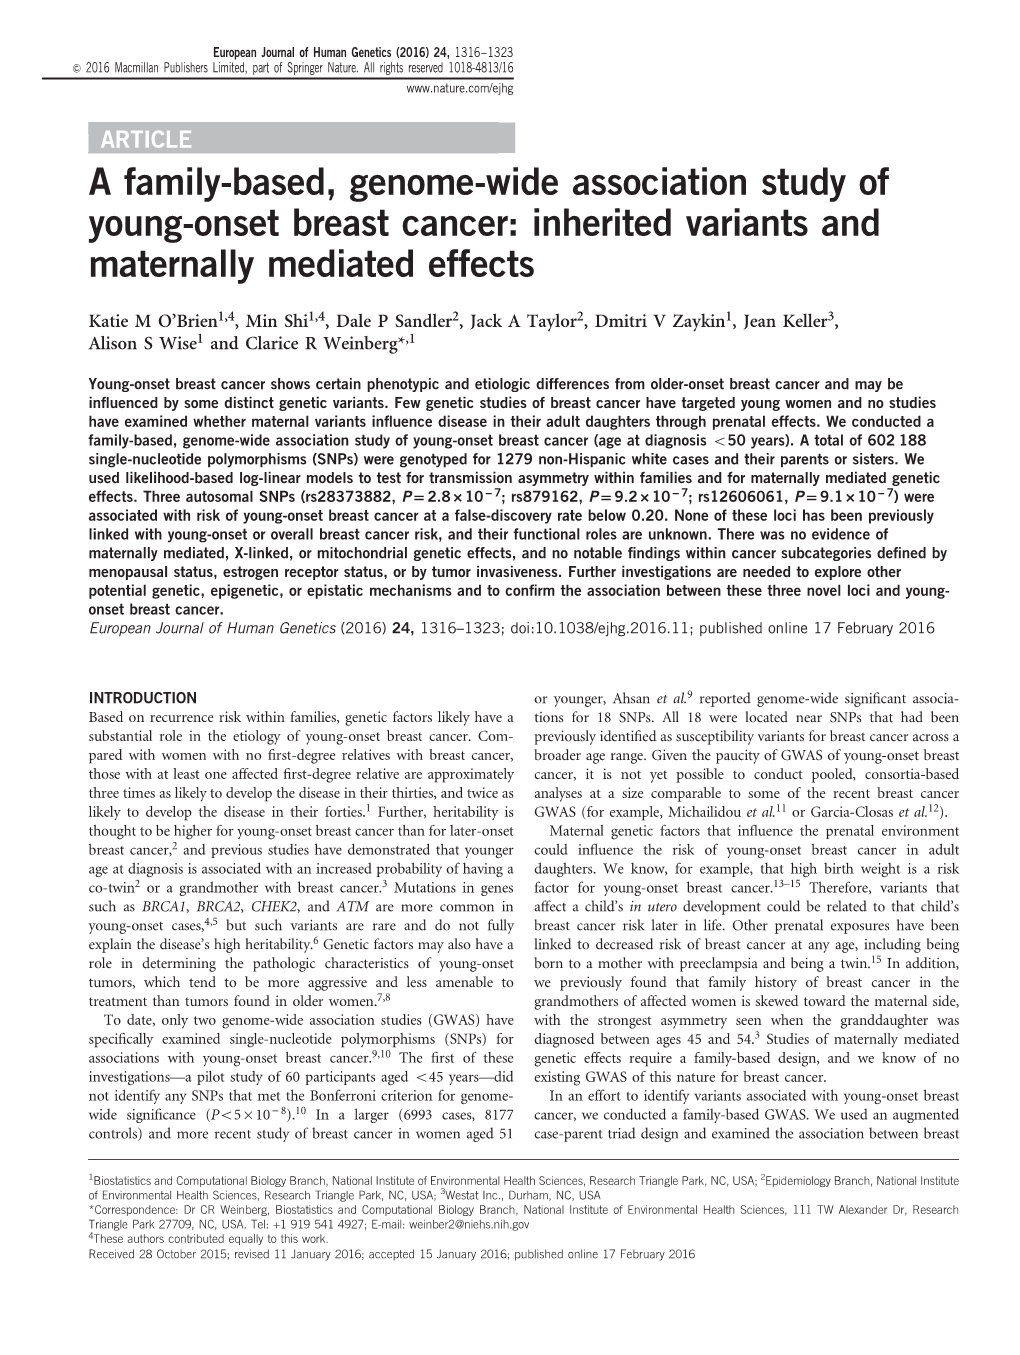 A Family-Based, Genome-Wide Association Study of Young-Onset Breast Cancer: Inherited Variants and Maternally Mediated Effects